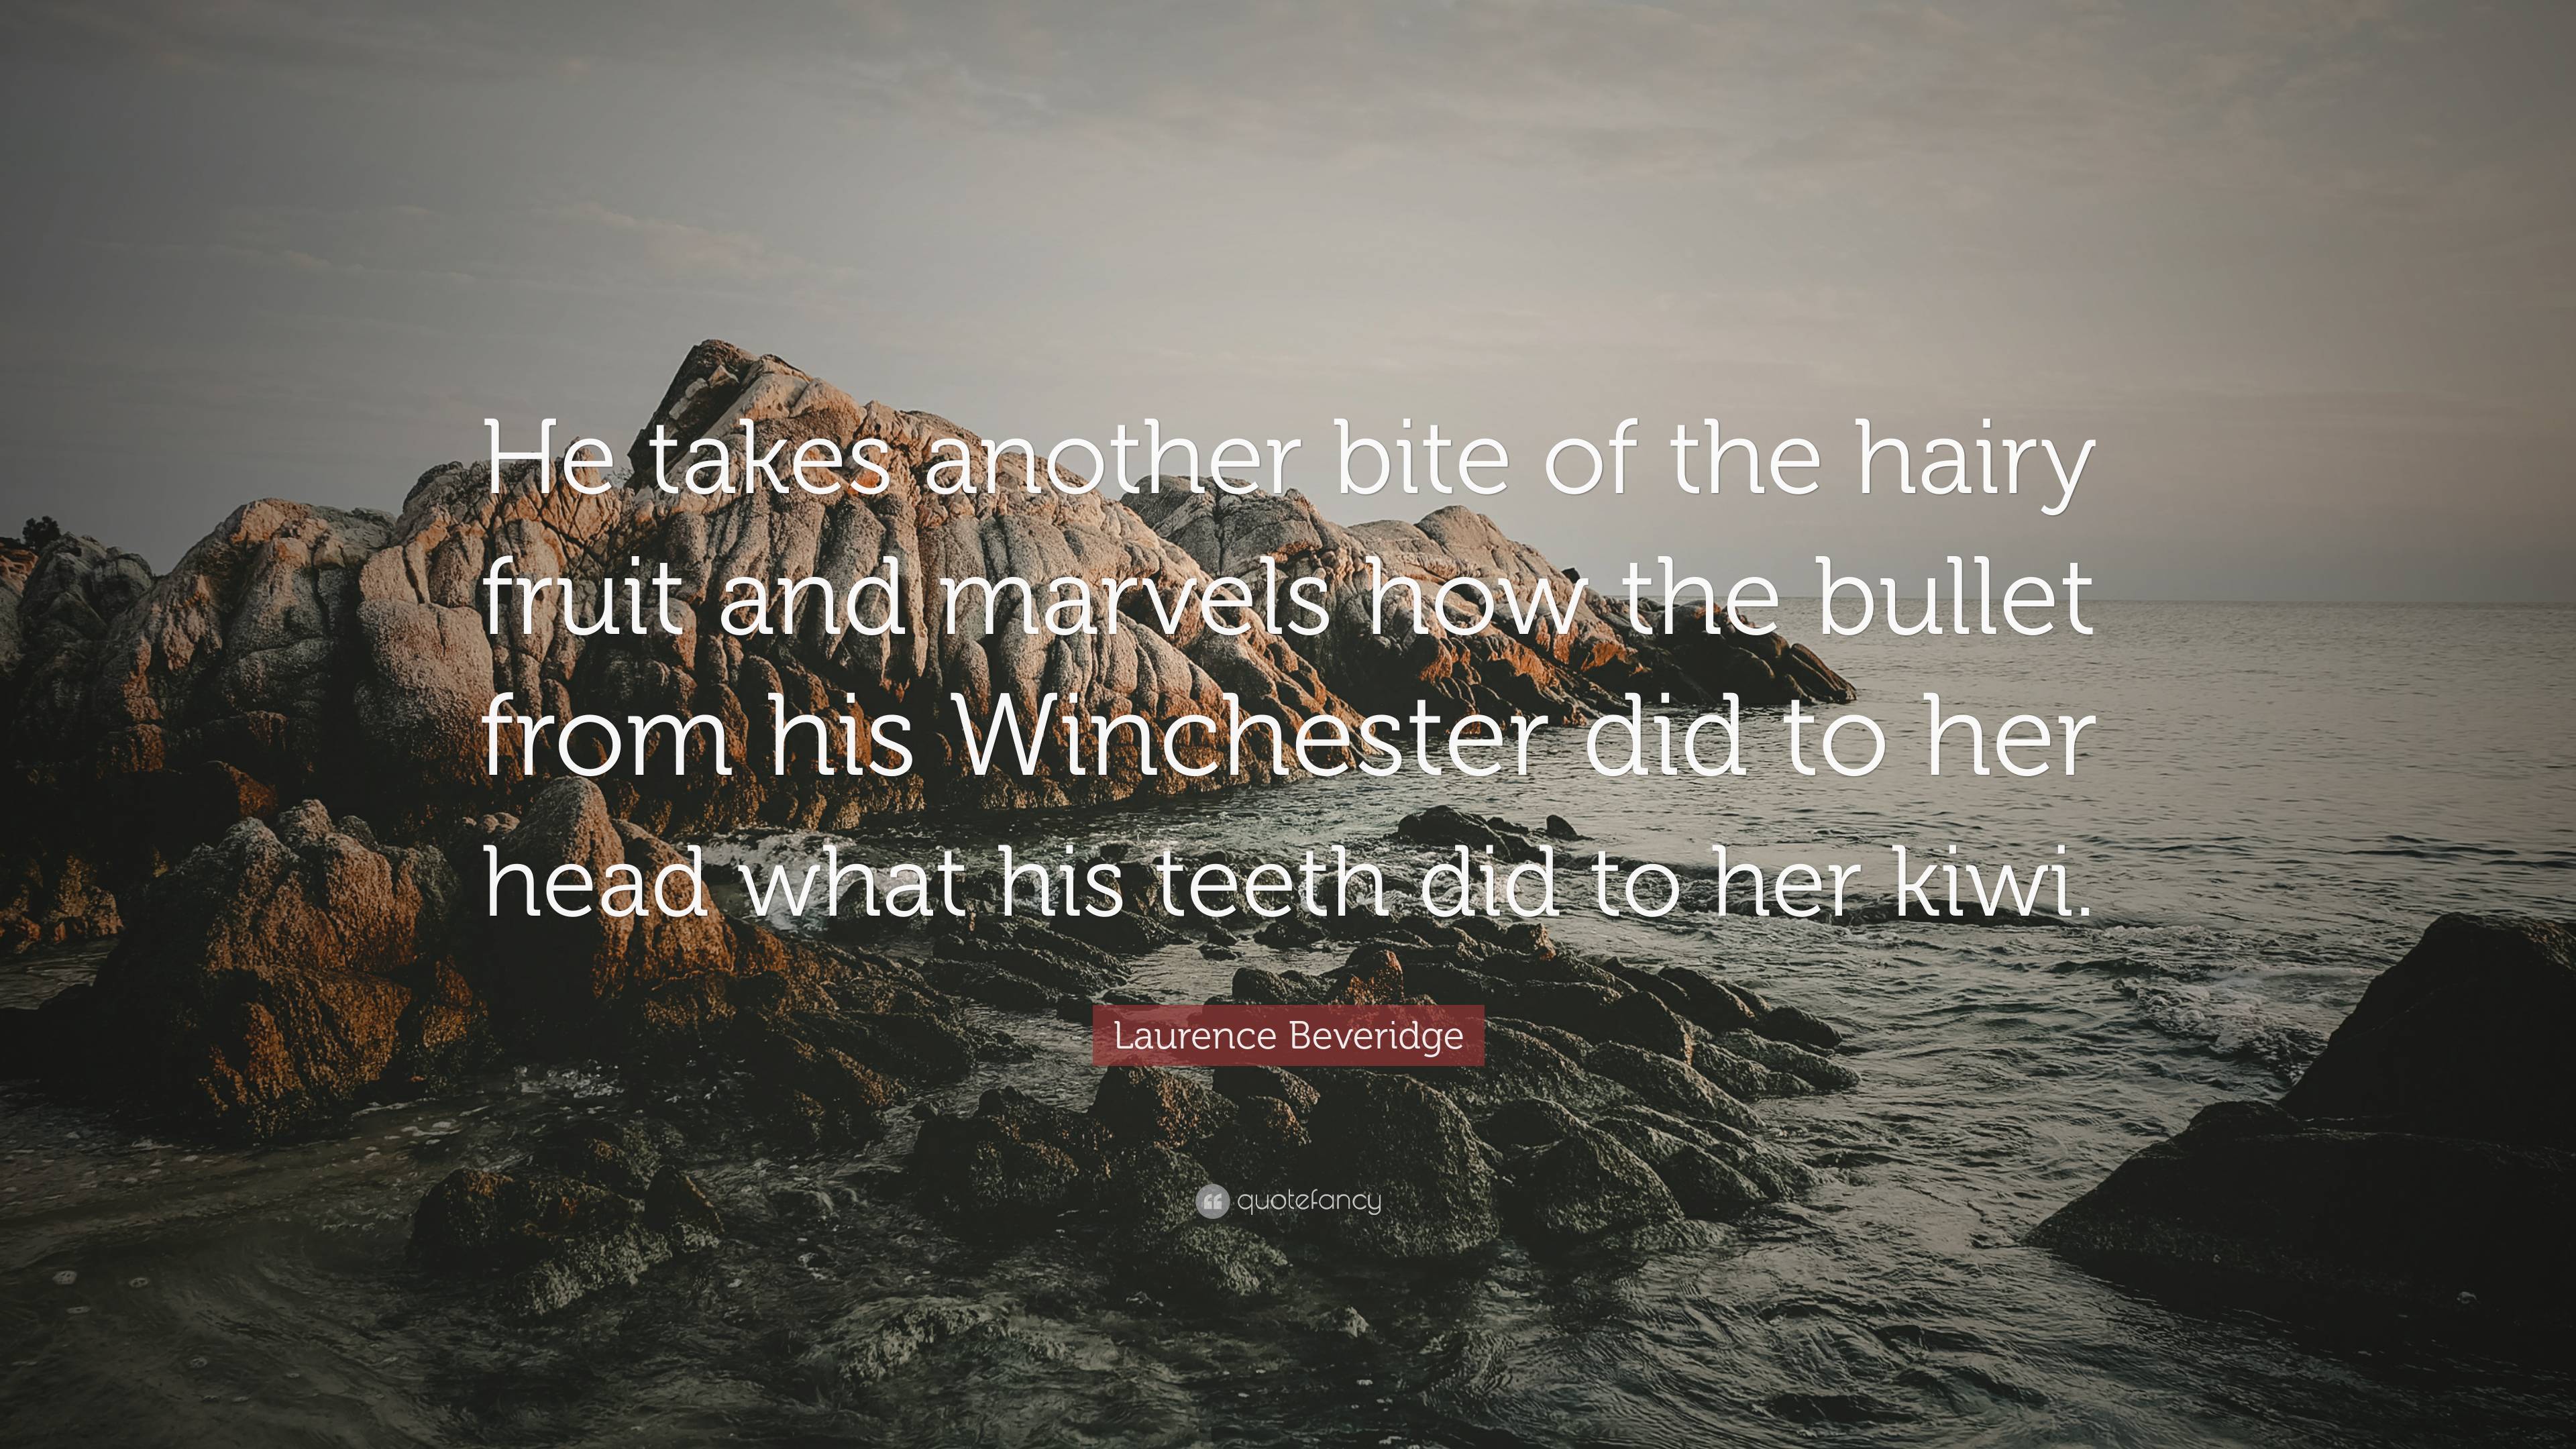 Laurence Beveridge Quote: “He takes another bite of the hairy fruit and ...